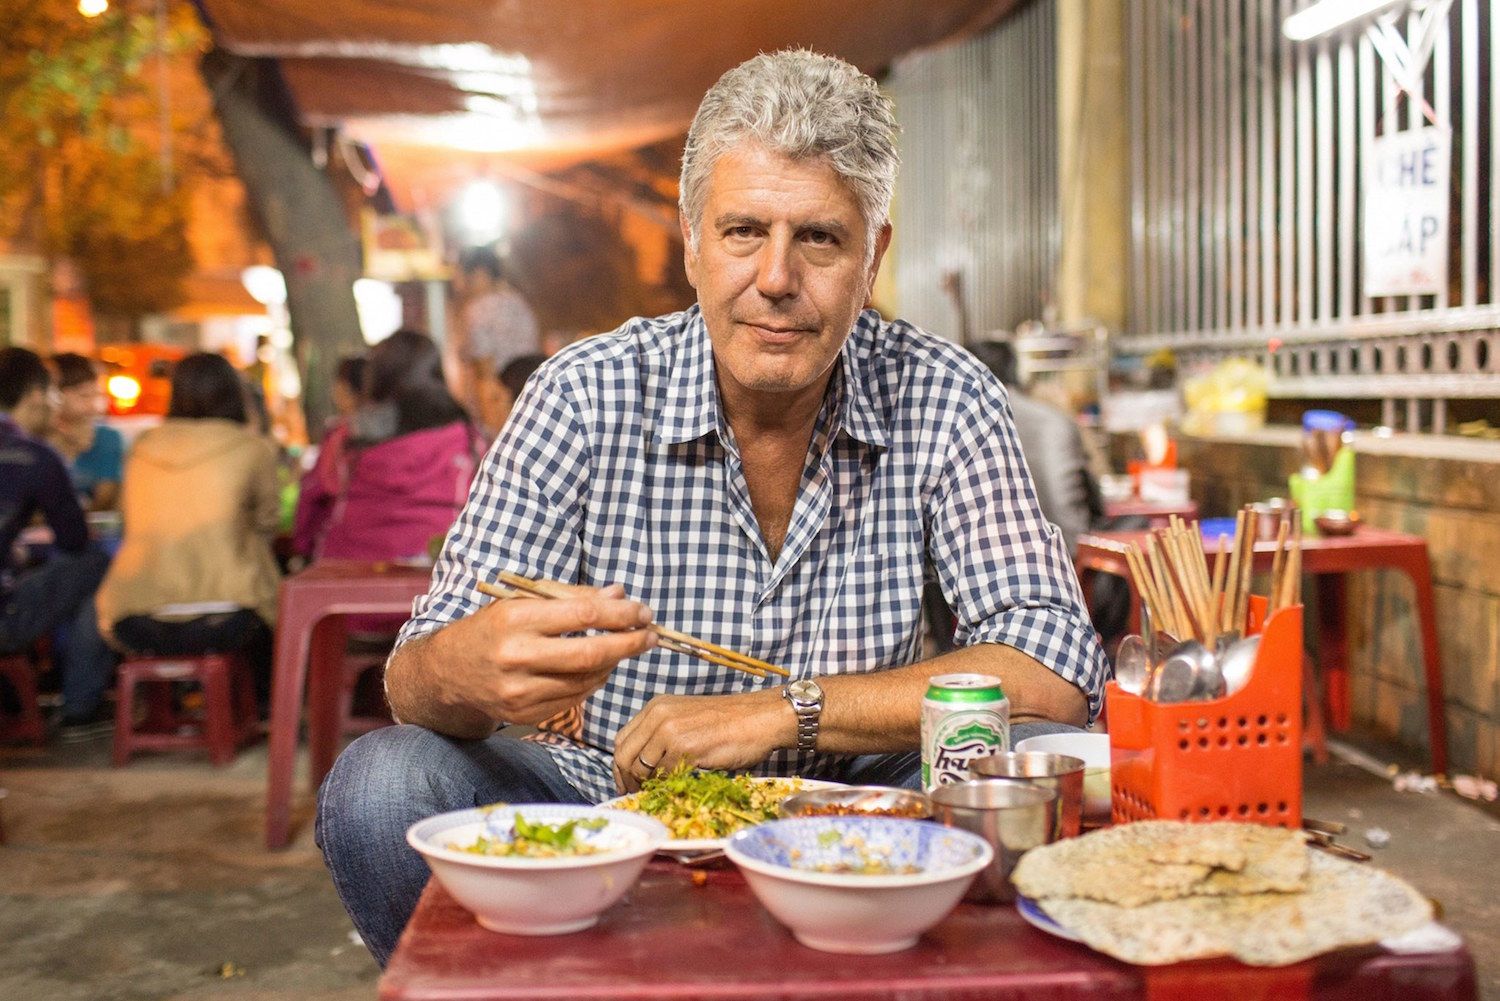 A new travel book by the late Anthony Bourdain will be released this October